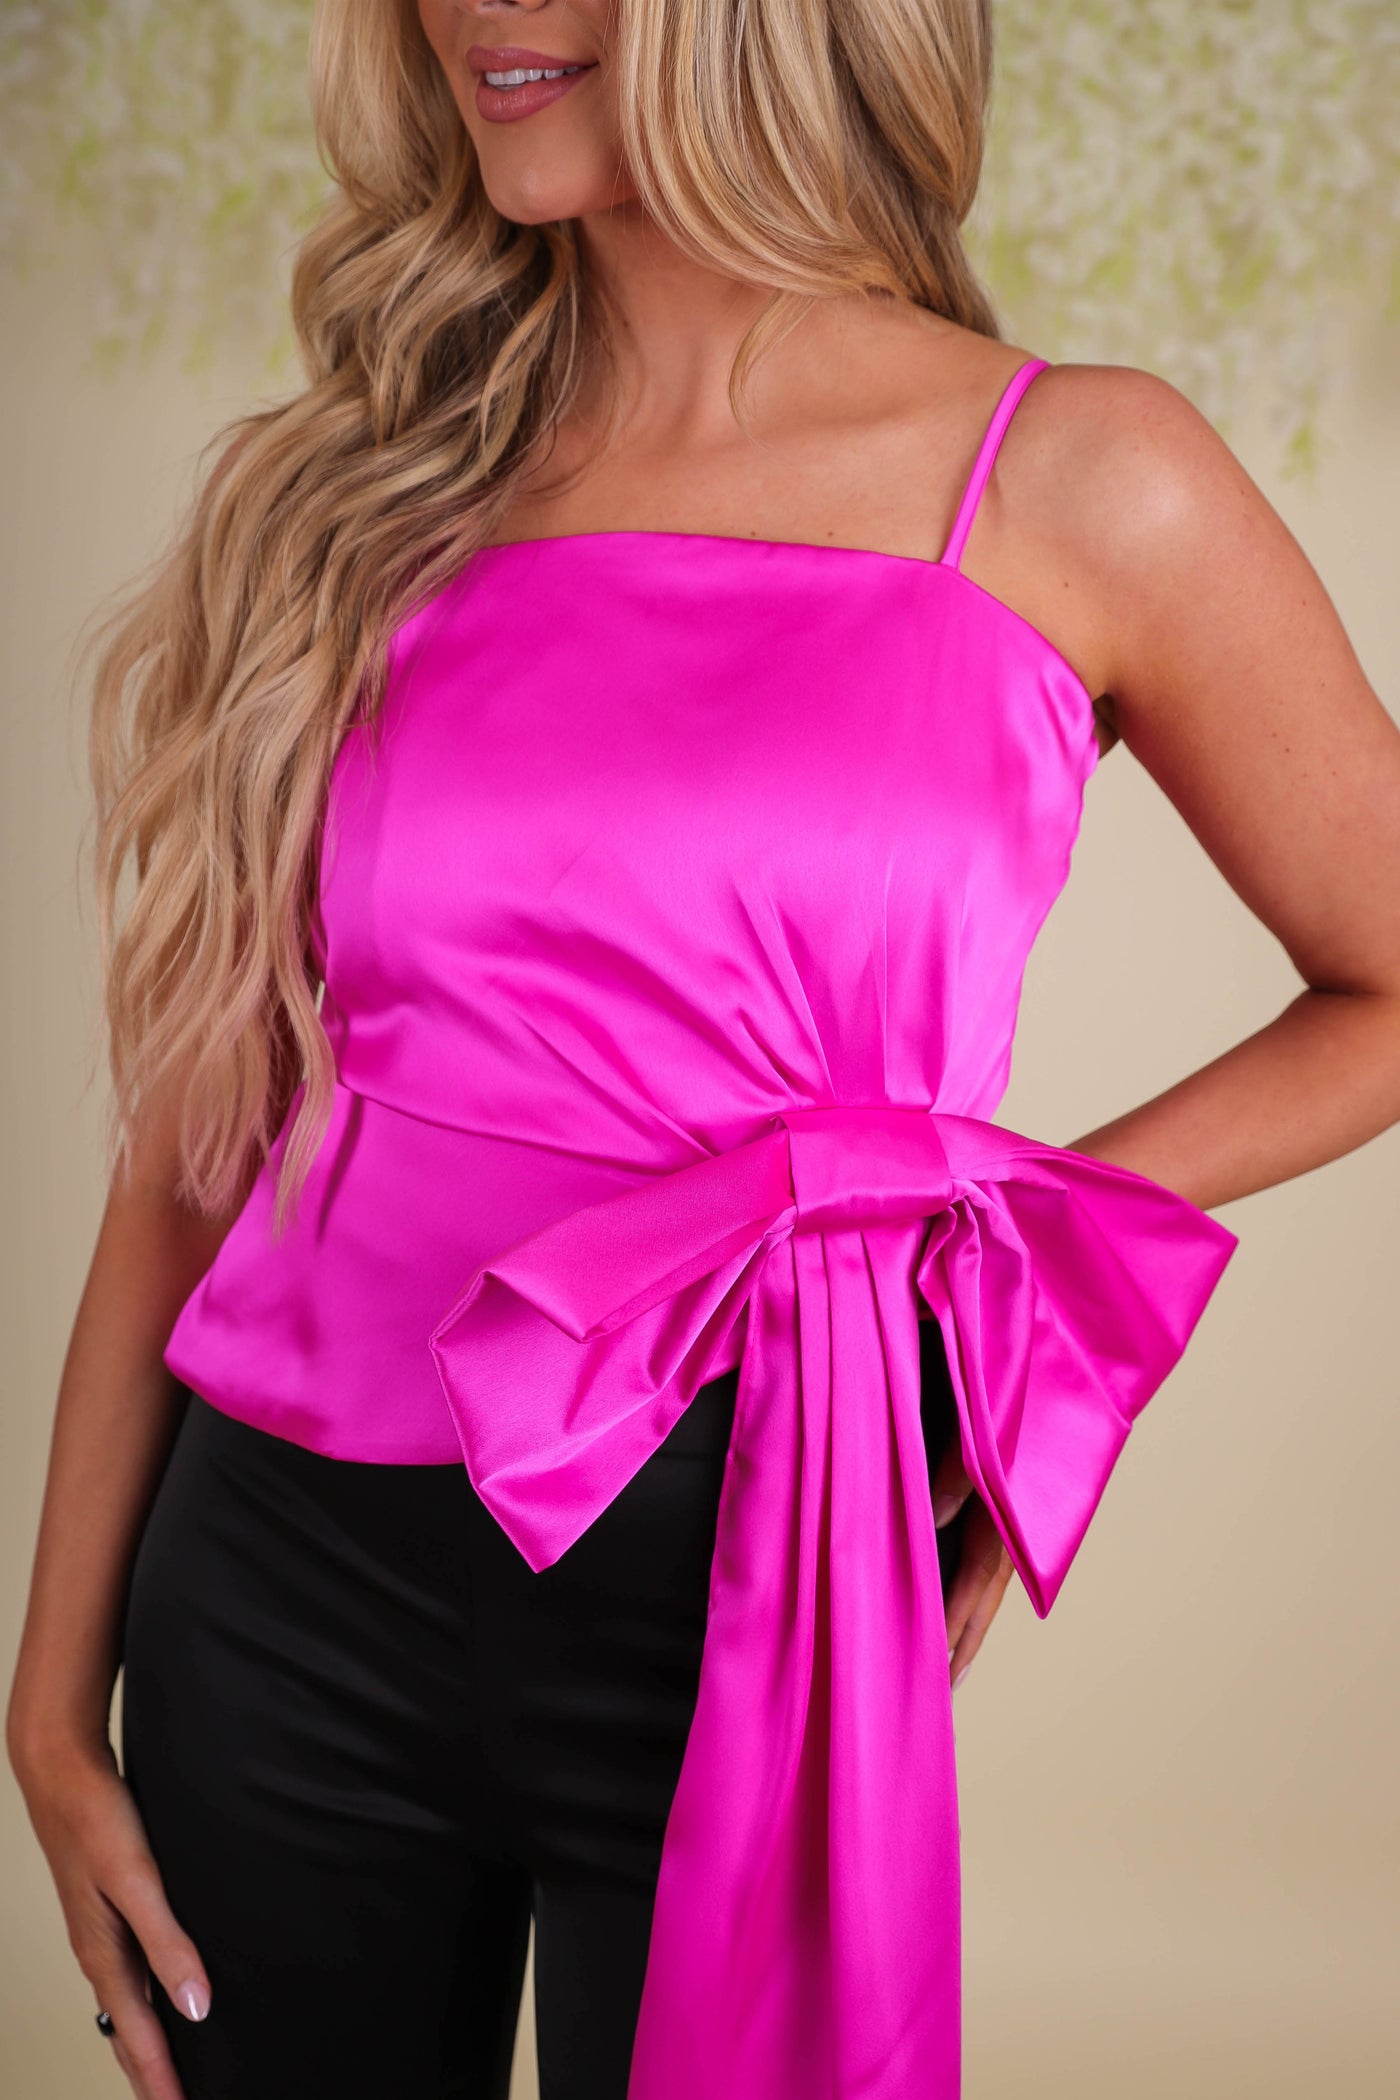 Women's Pink Satin Top- Women's Pink Bow Top- GLAM Satin Bow Top